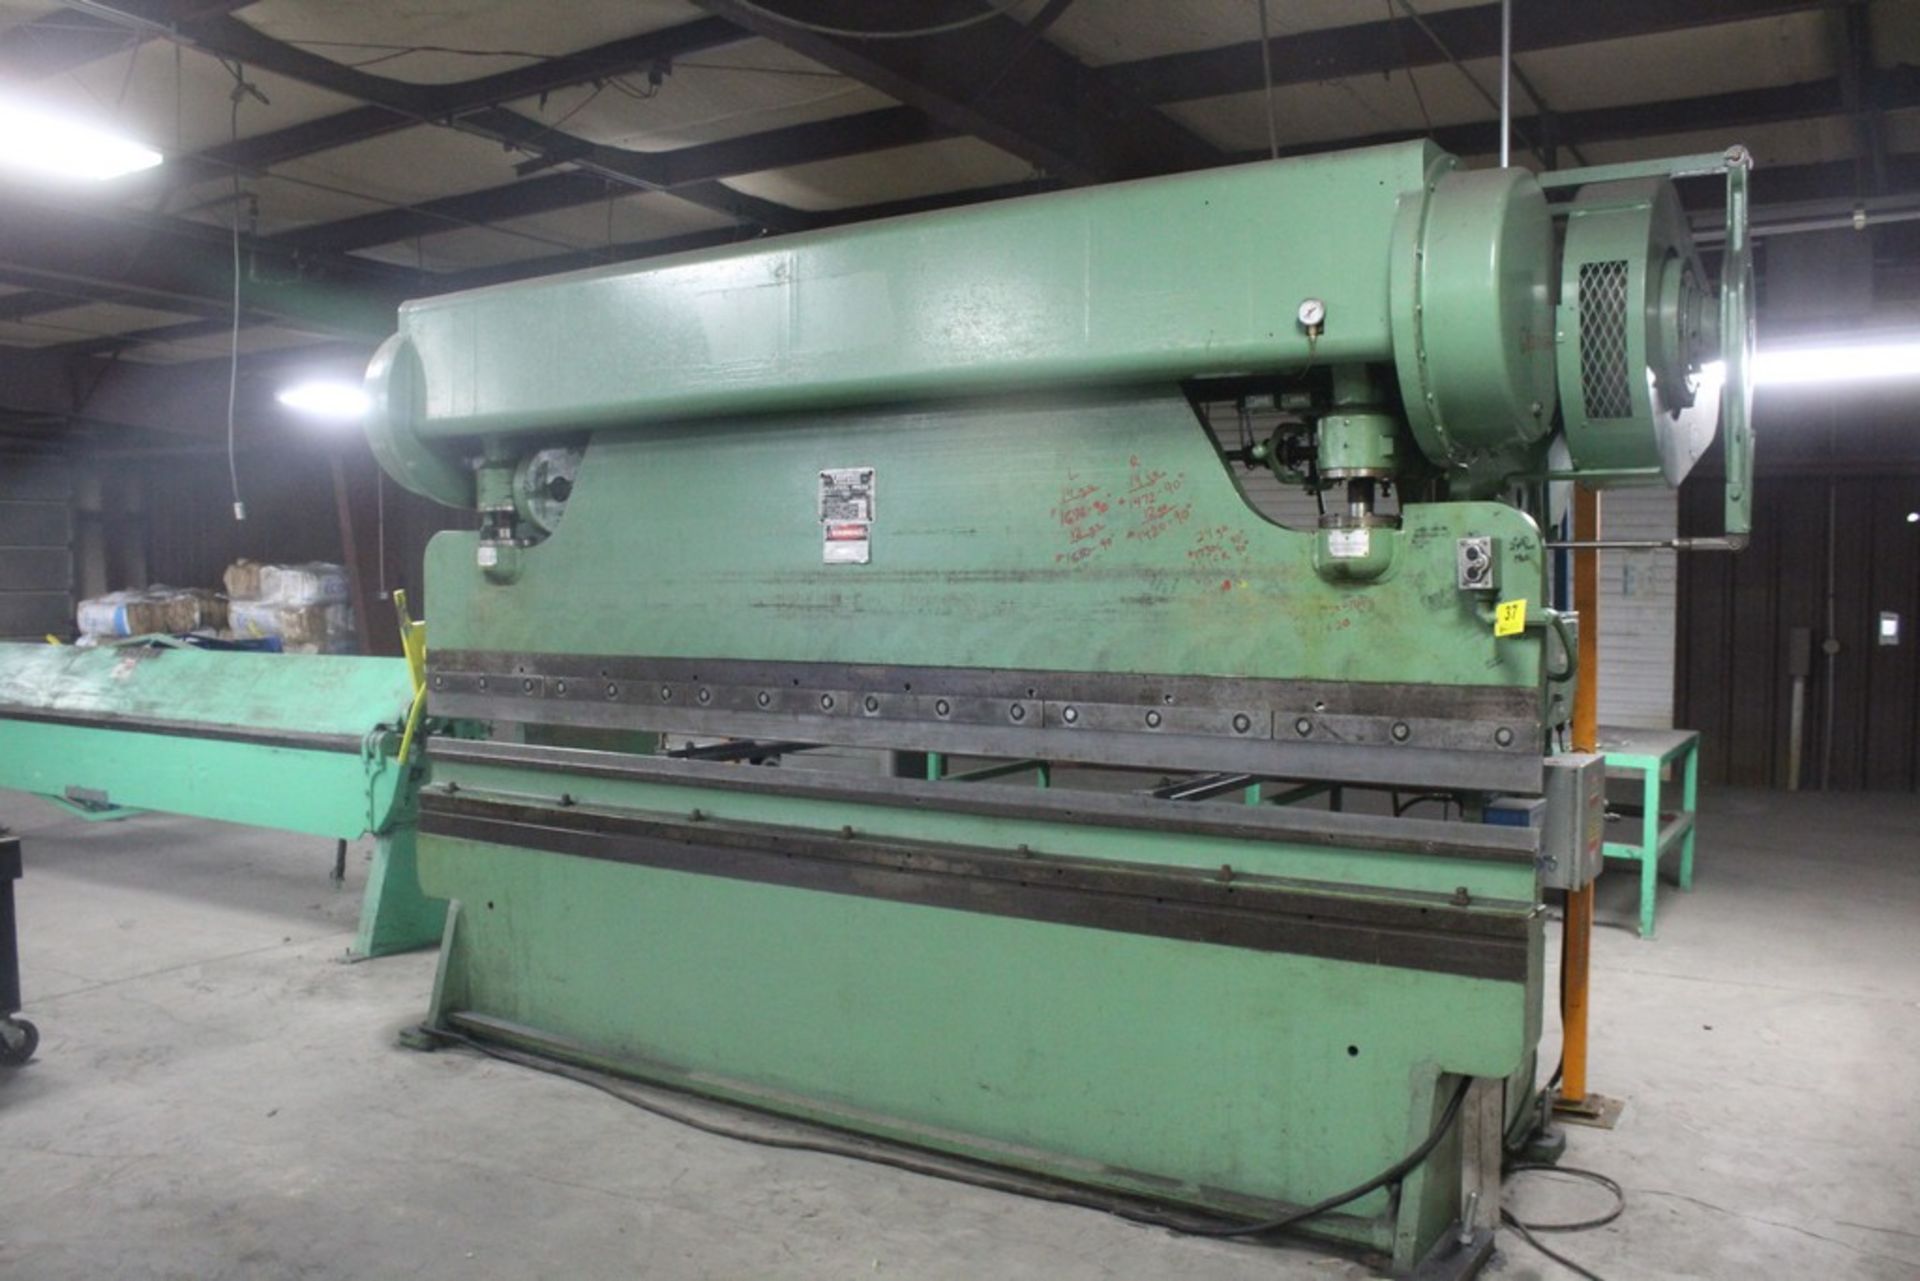 Verson Model 2010-65 Mechanical Power Press Brake, Serial Number: 20844 90 Ton - 12' Overall - Air